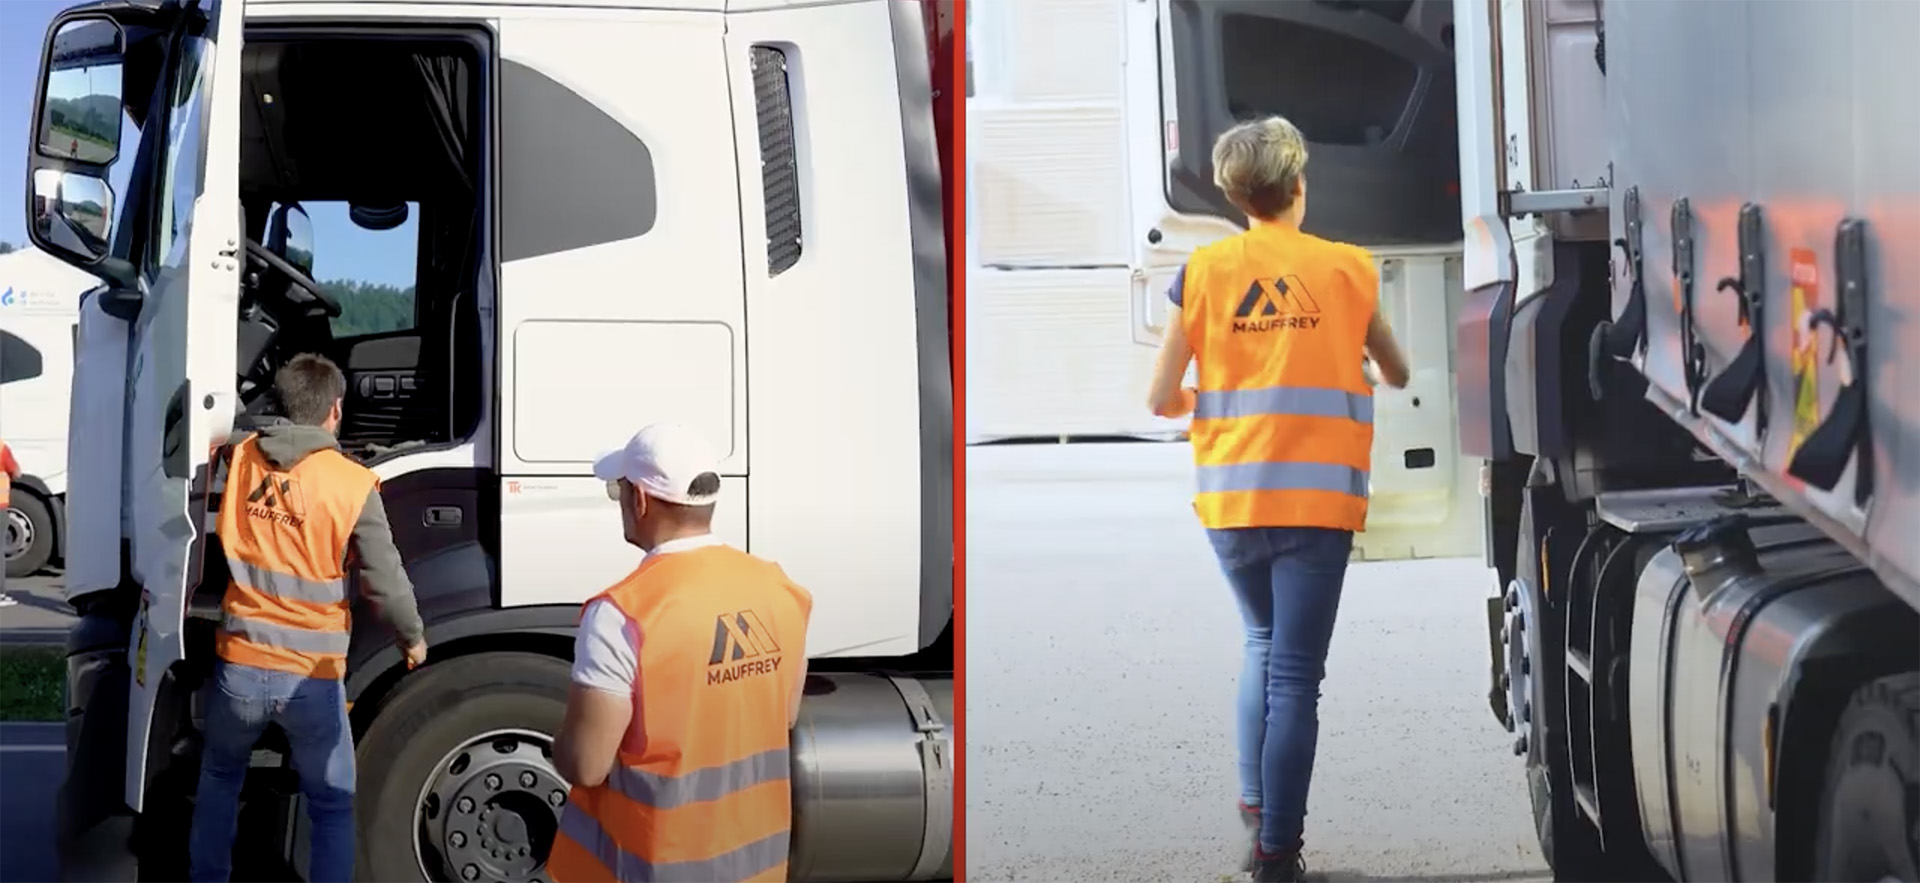 Academy-mauffrey-formations-video-conducteur-routier